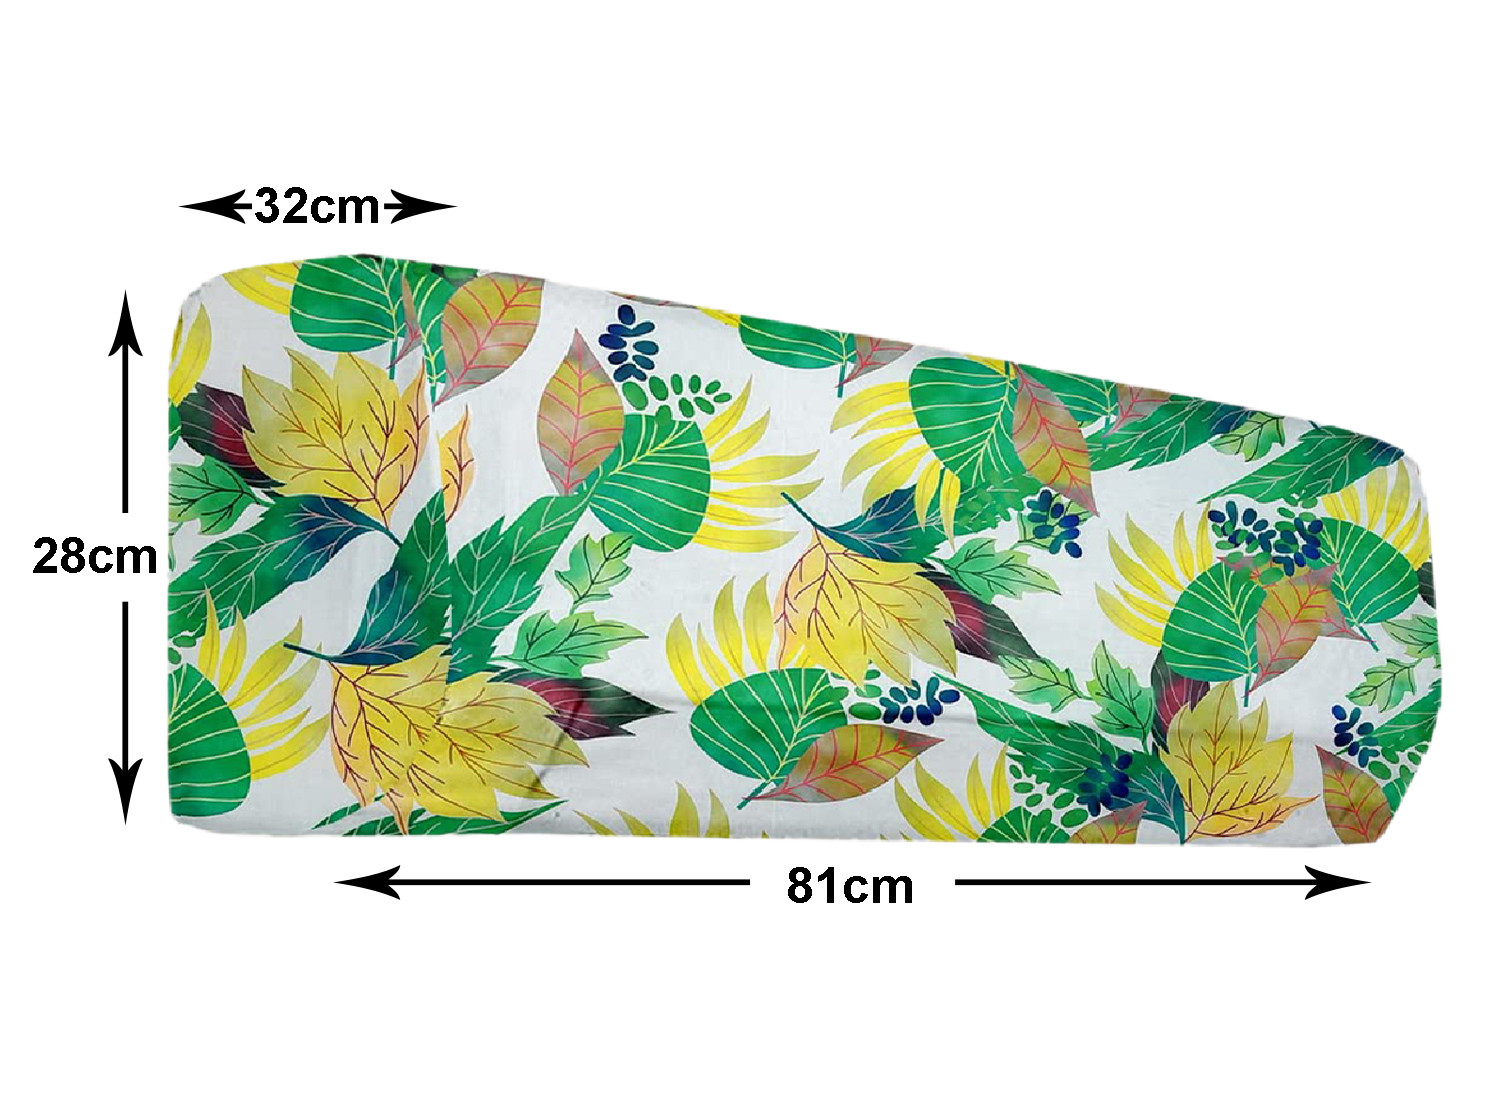 Kuber Industries AC Cover|Attractive Leaf Print 1.5 Ton|All Weather Friendly|Stretchable Fabric & Elastic Closure, (Green)